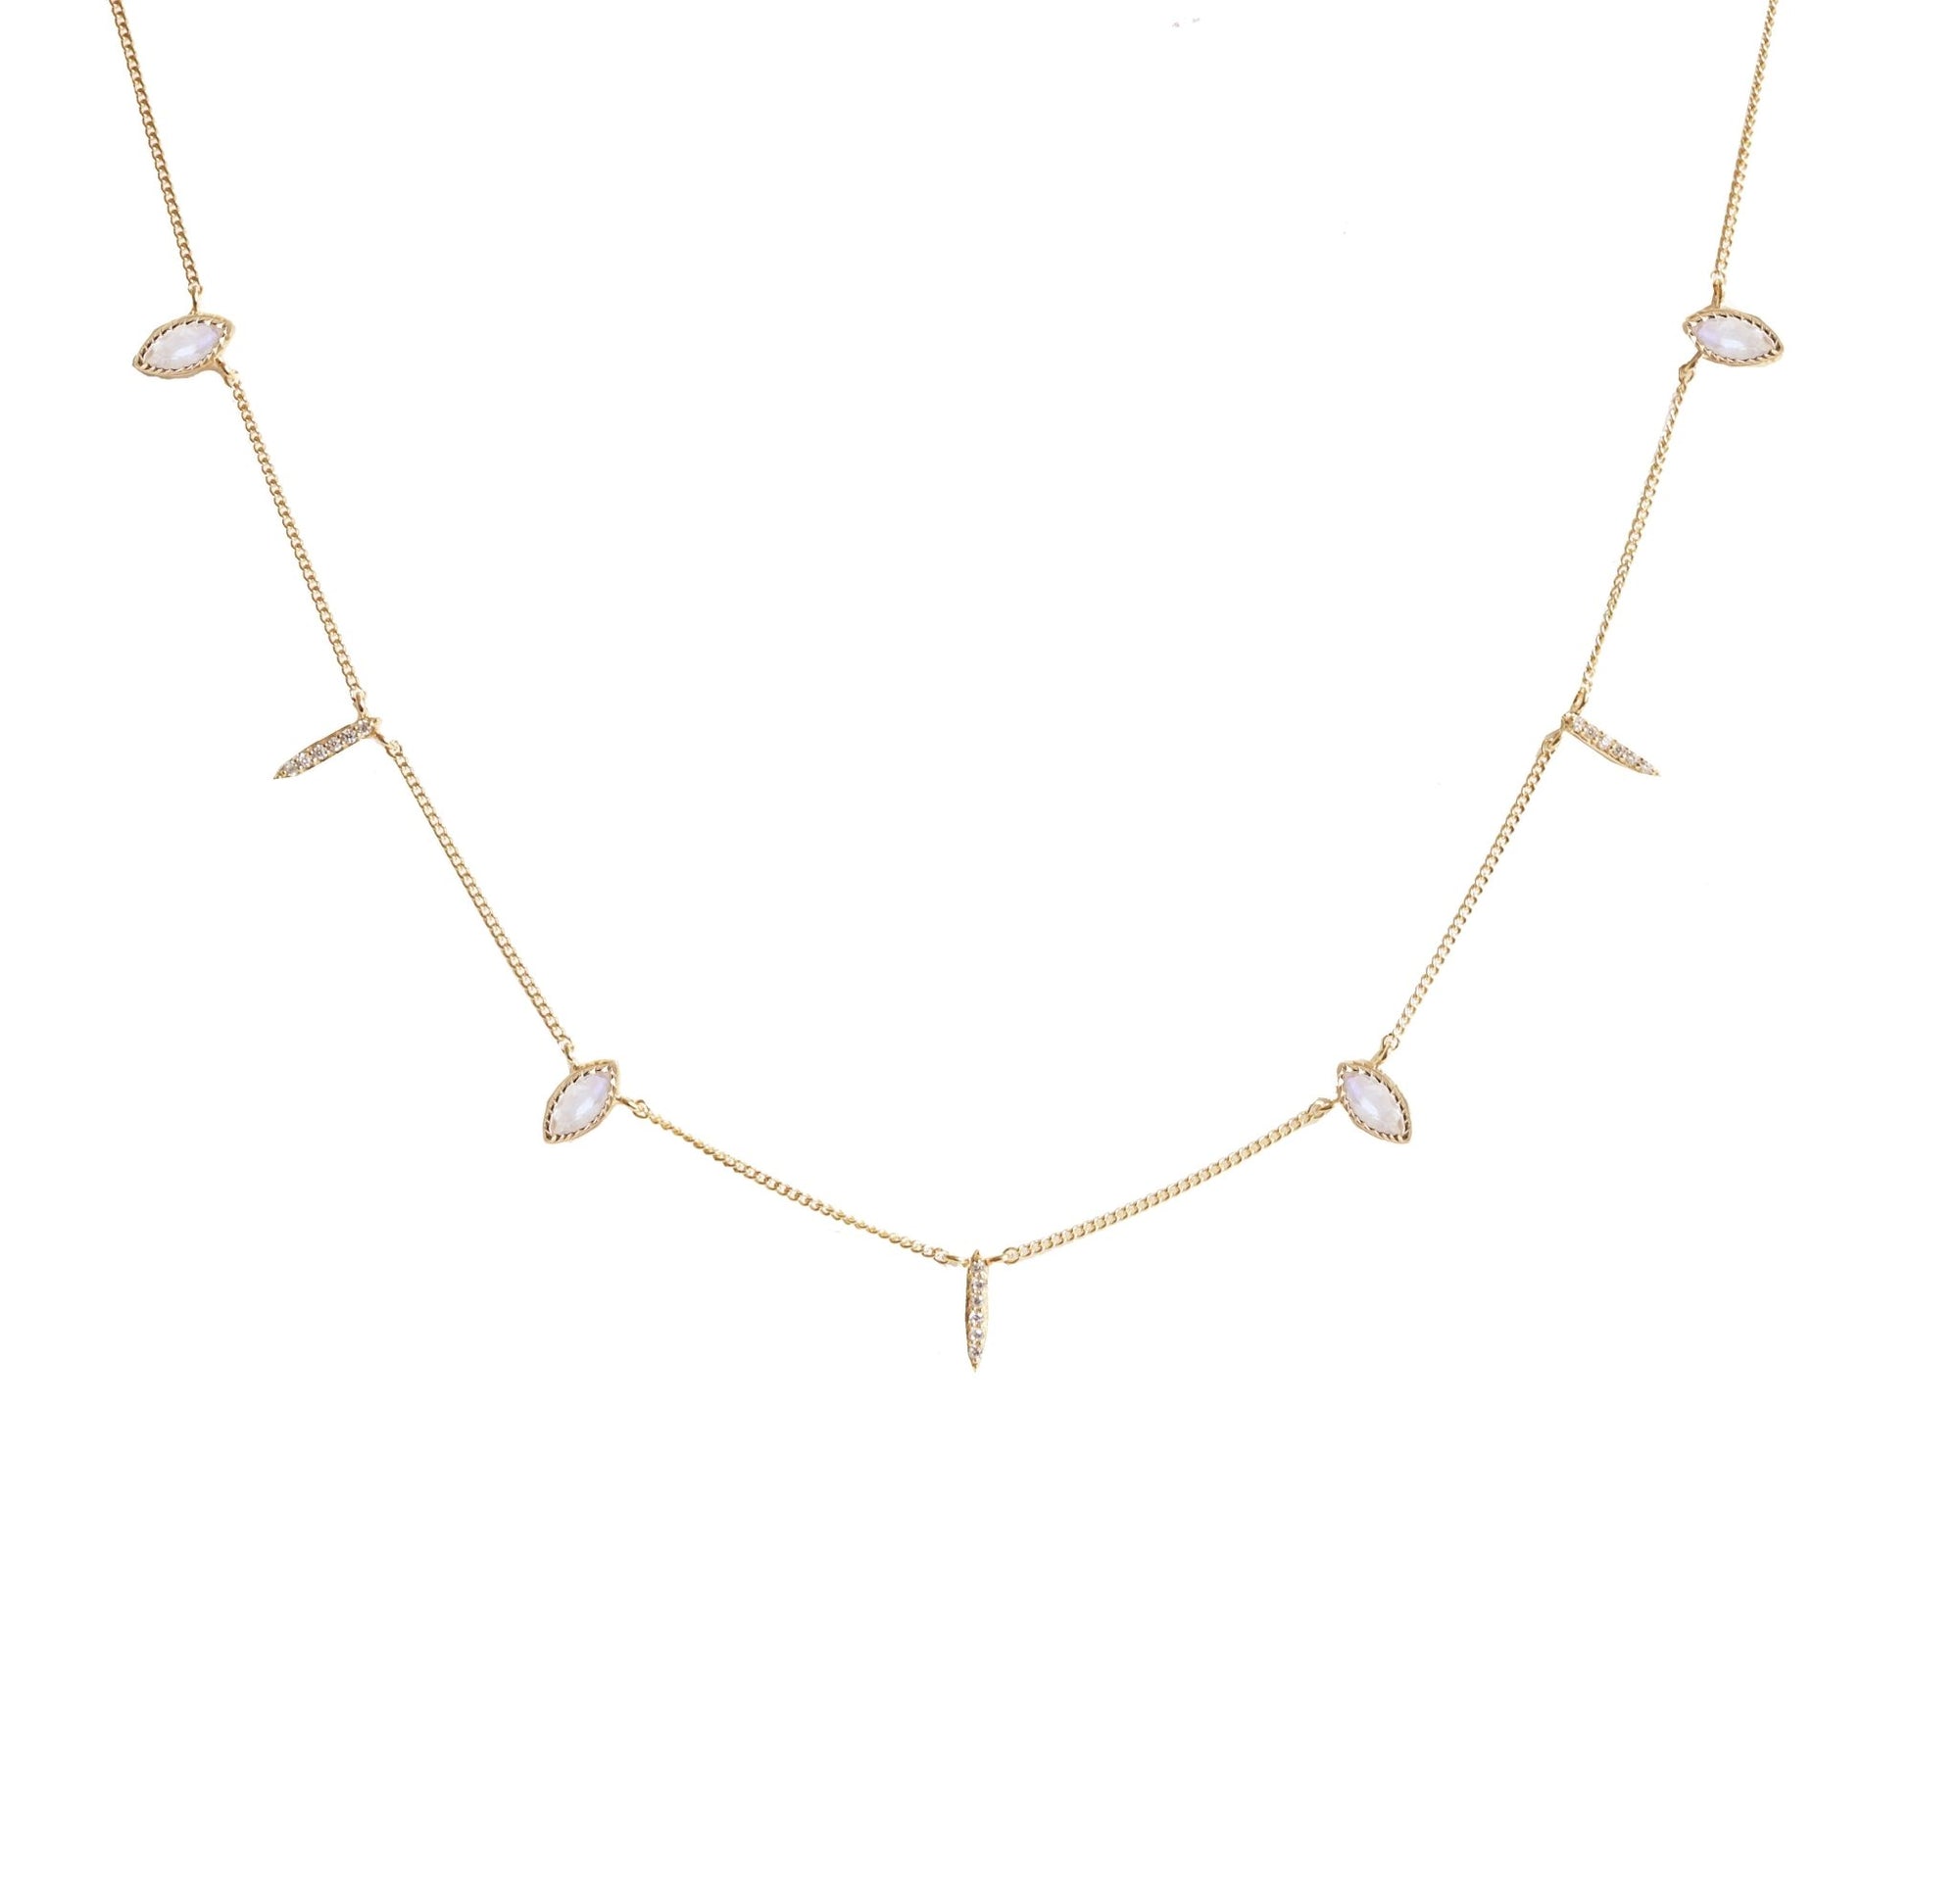 DREAM STARDUST RAINBOW MOONSTONE, CUBIC ZIRCONIA & GOLD SHORT NECKLACE - SO PRETTY CARA COTTER